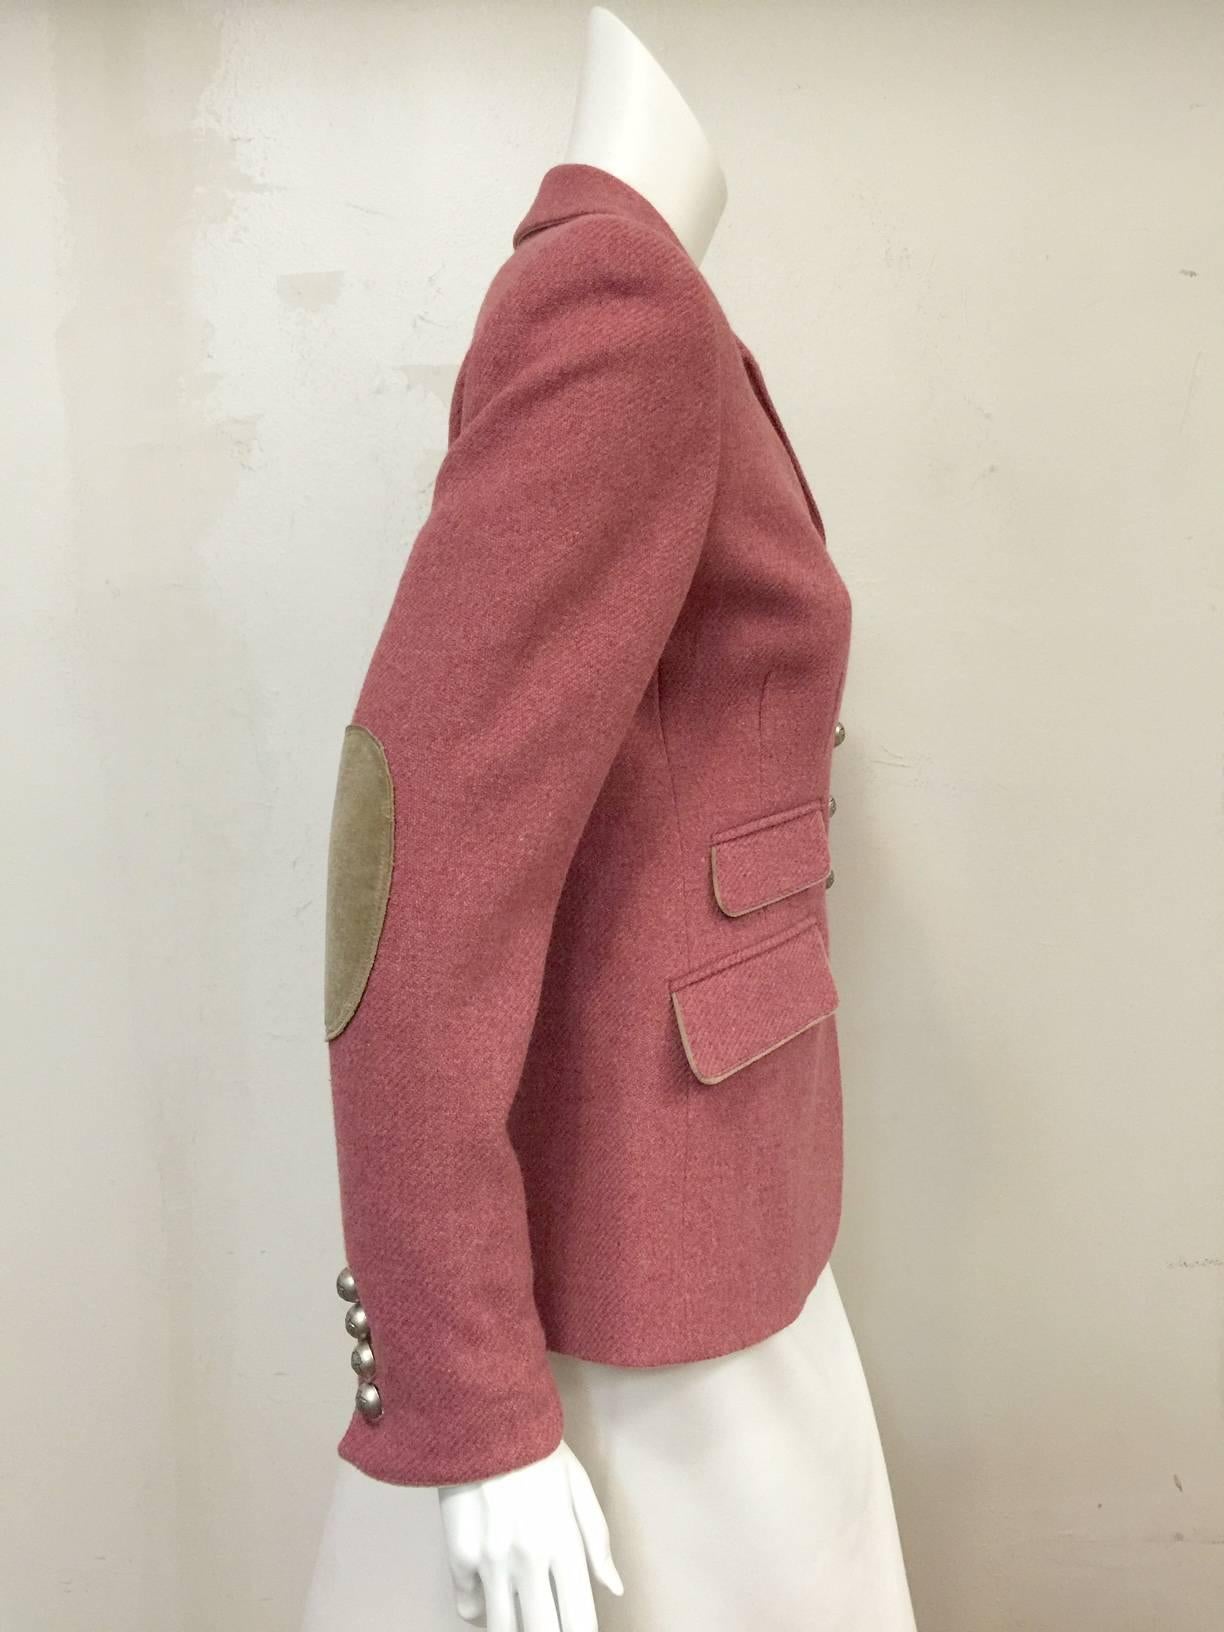 New Susanne Spatt Rose Blazer With Handkerchief is worthy of dressage!  Crafted from ultra luxurious lambswool, blazer is trimmed in warm tan velvet and features suede elbow patches.  Four front pockets...one breast and three flap slanted pockets. 